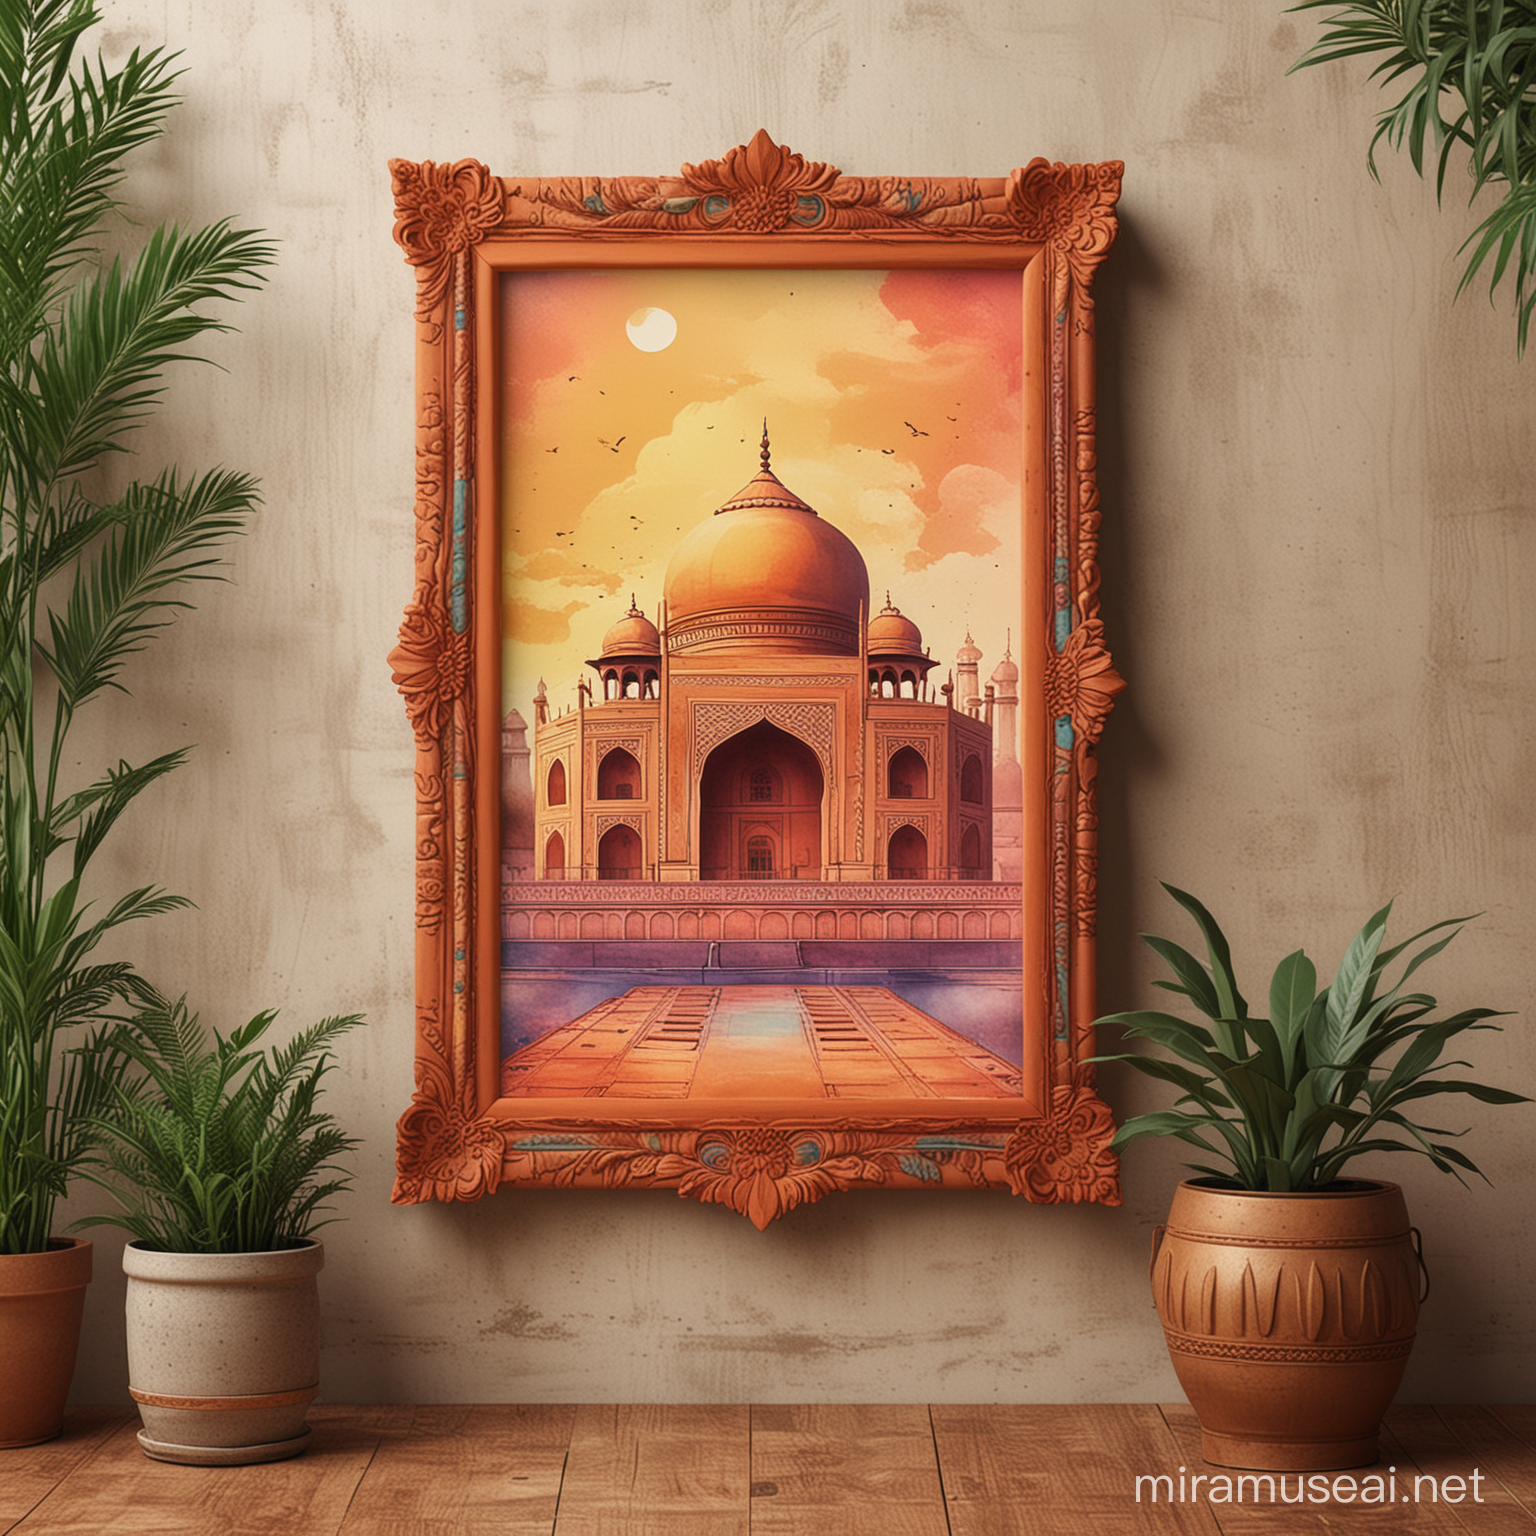 Create a mockup of a frame in A2 format in an Indian setting. A profusion of colors and materials, so that I can promote my illustration creation